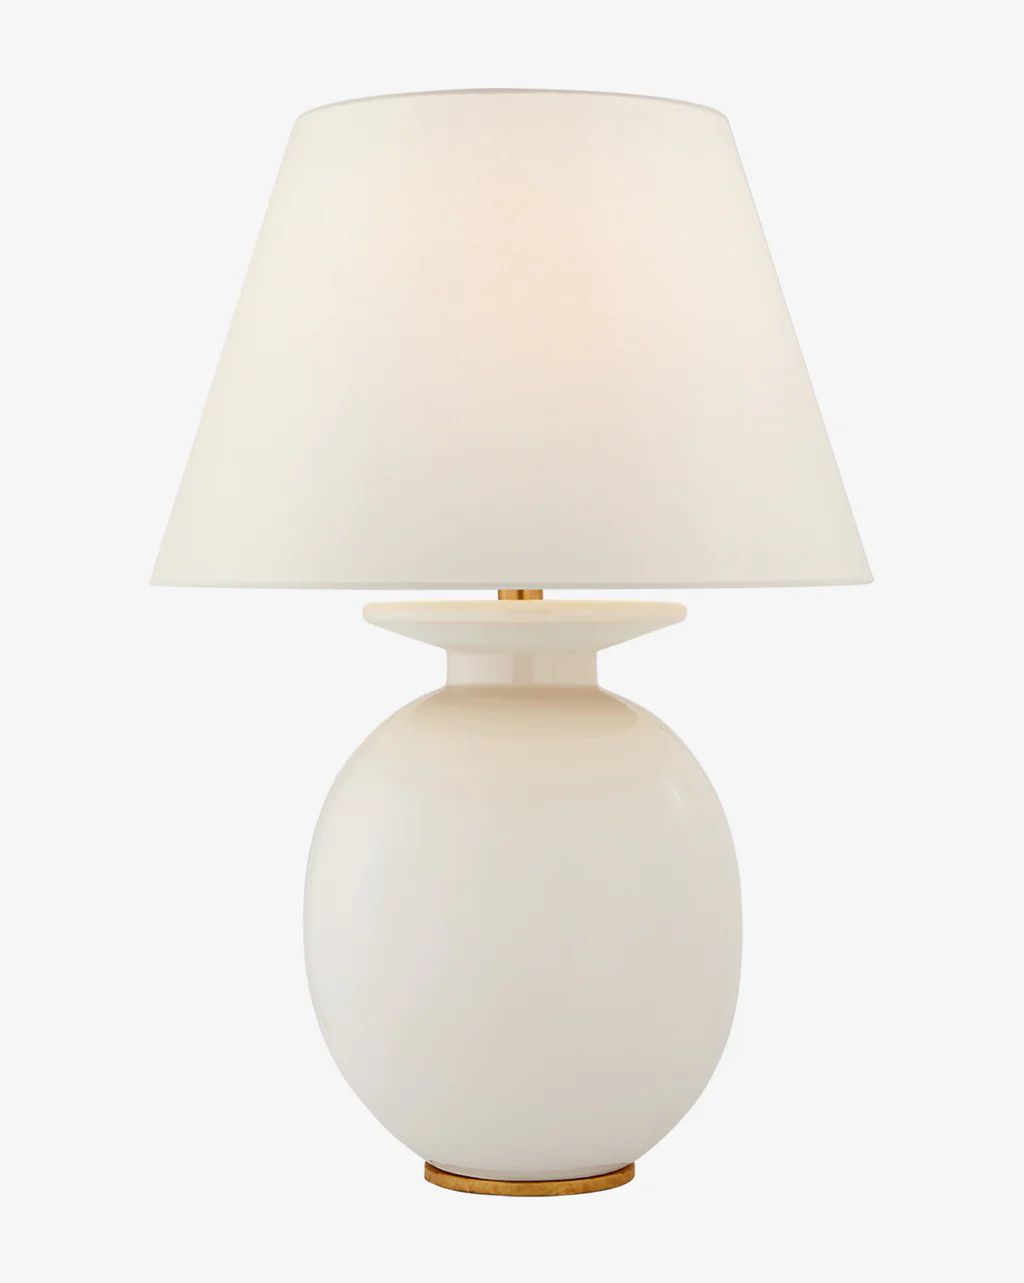 Hans Table Lamp | McGee & Co.